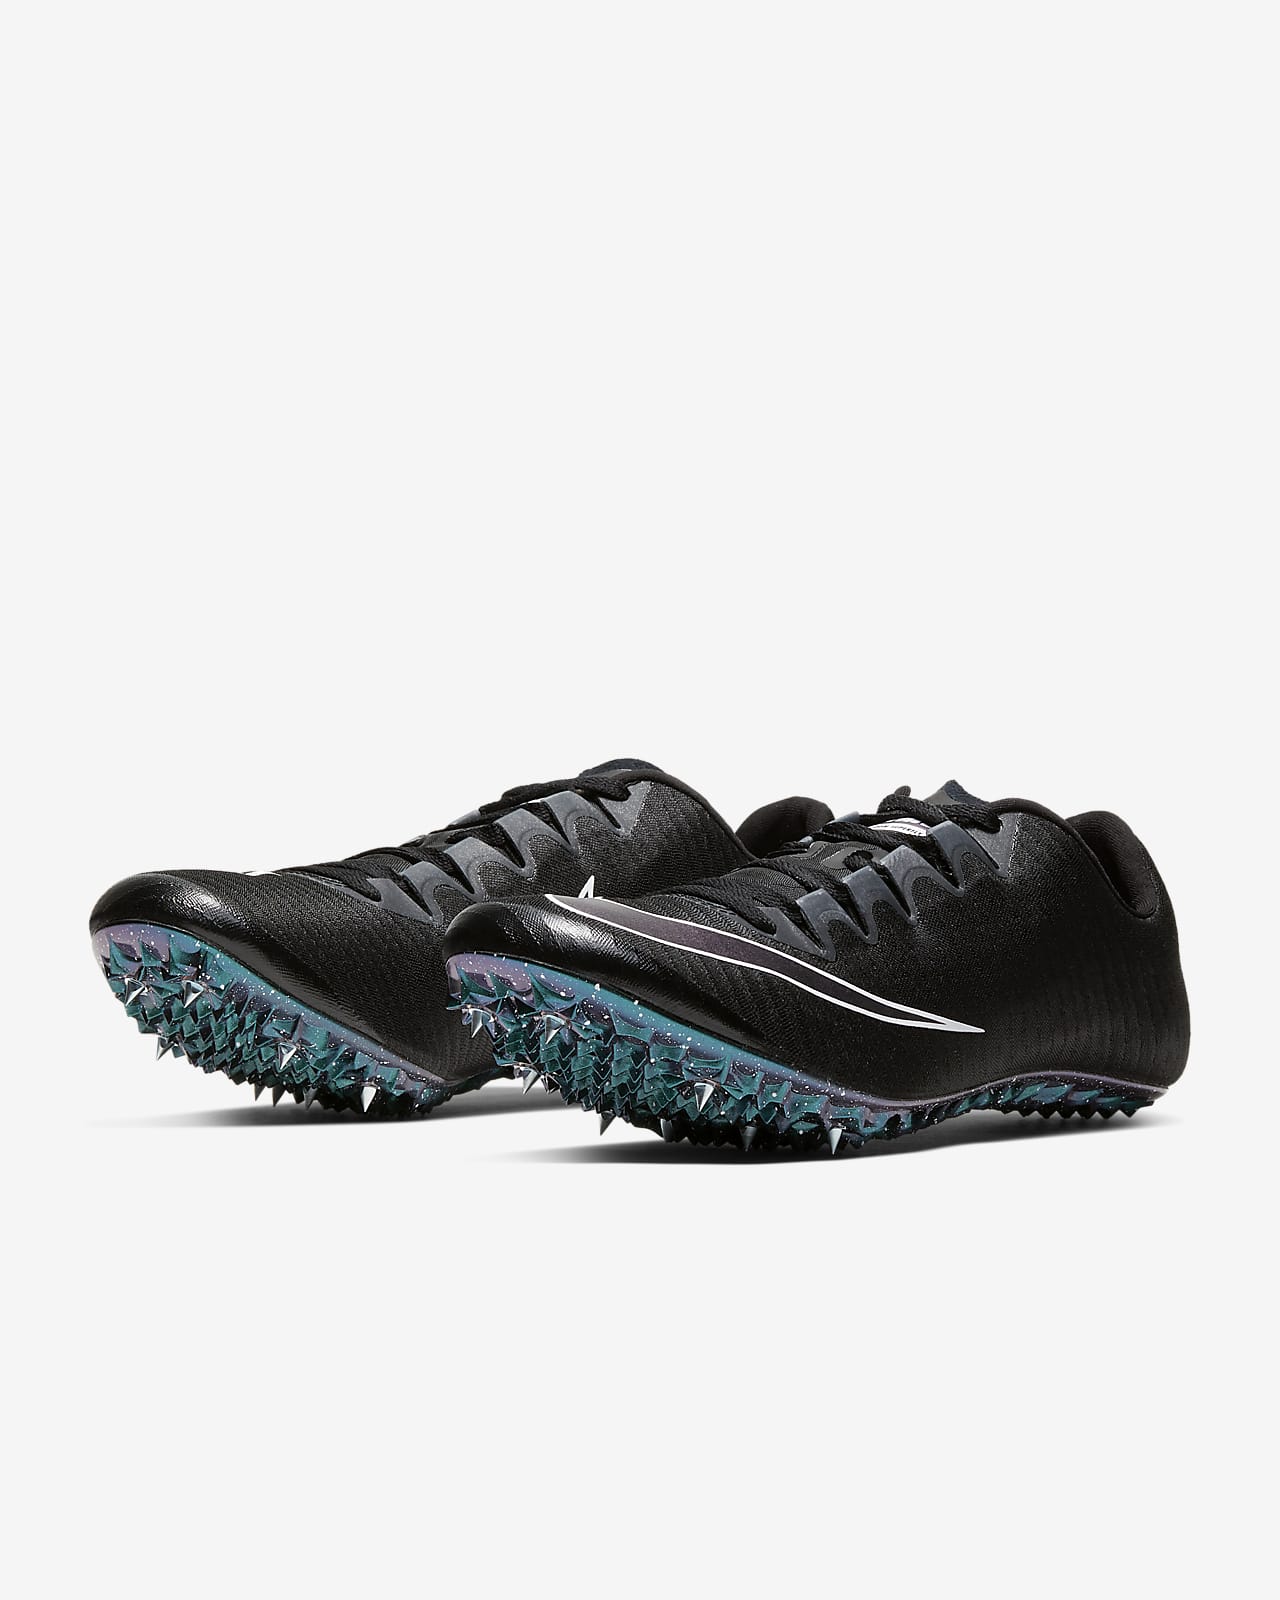 Nike Superfly Running Spikes Online 